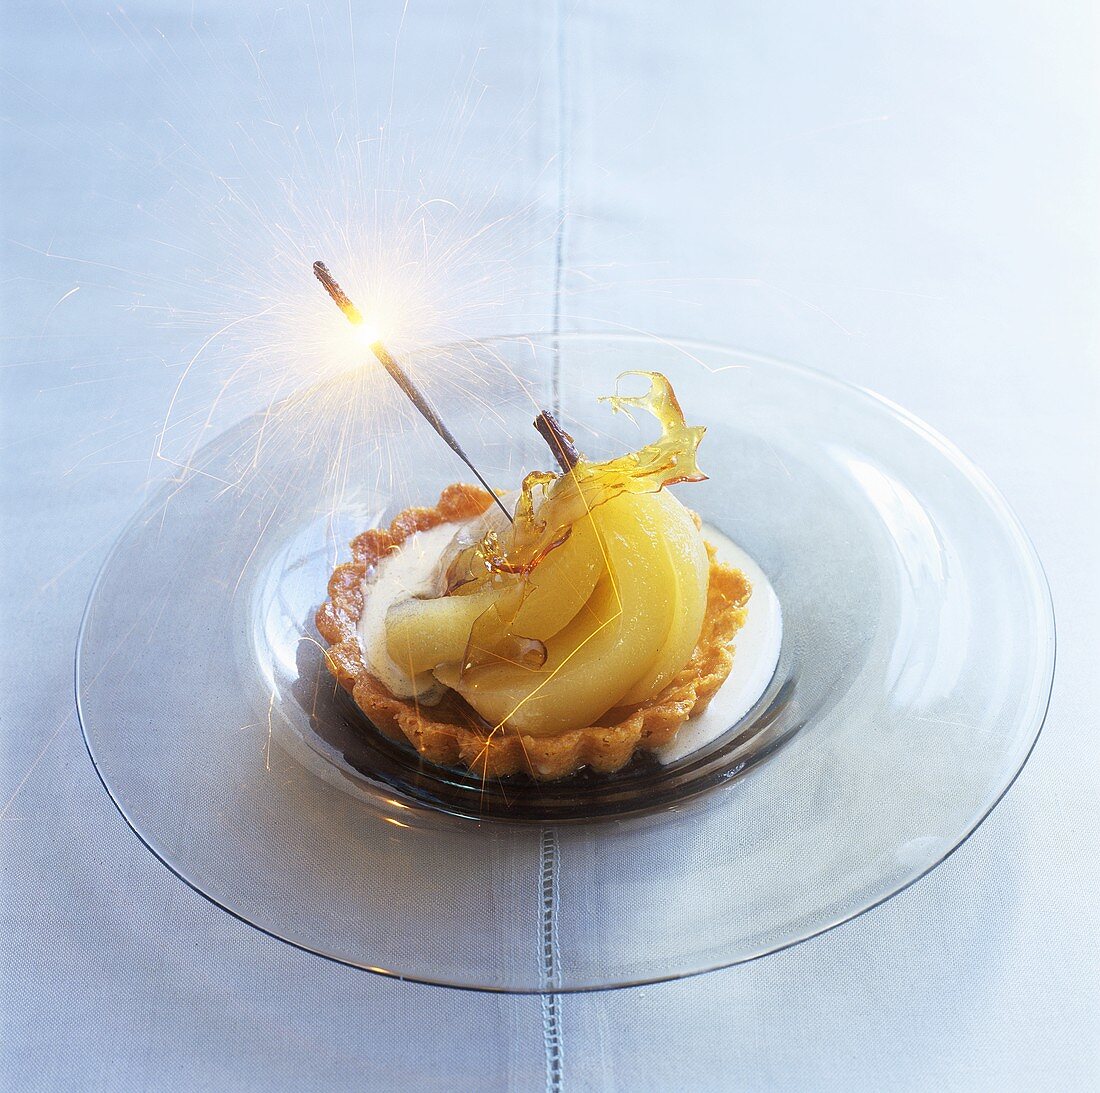 Pear and almond tartlet with spun sugar and sparkler